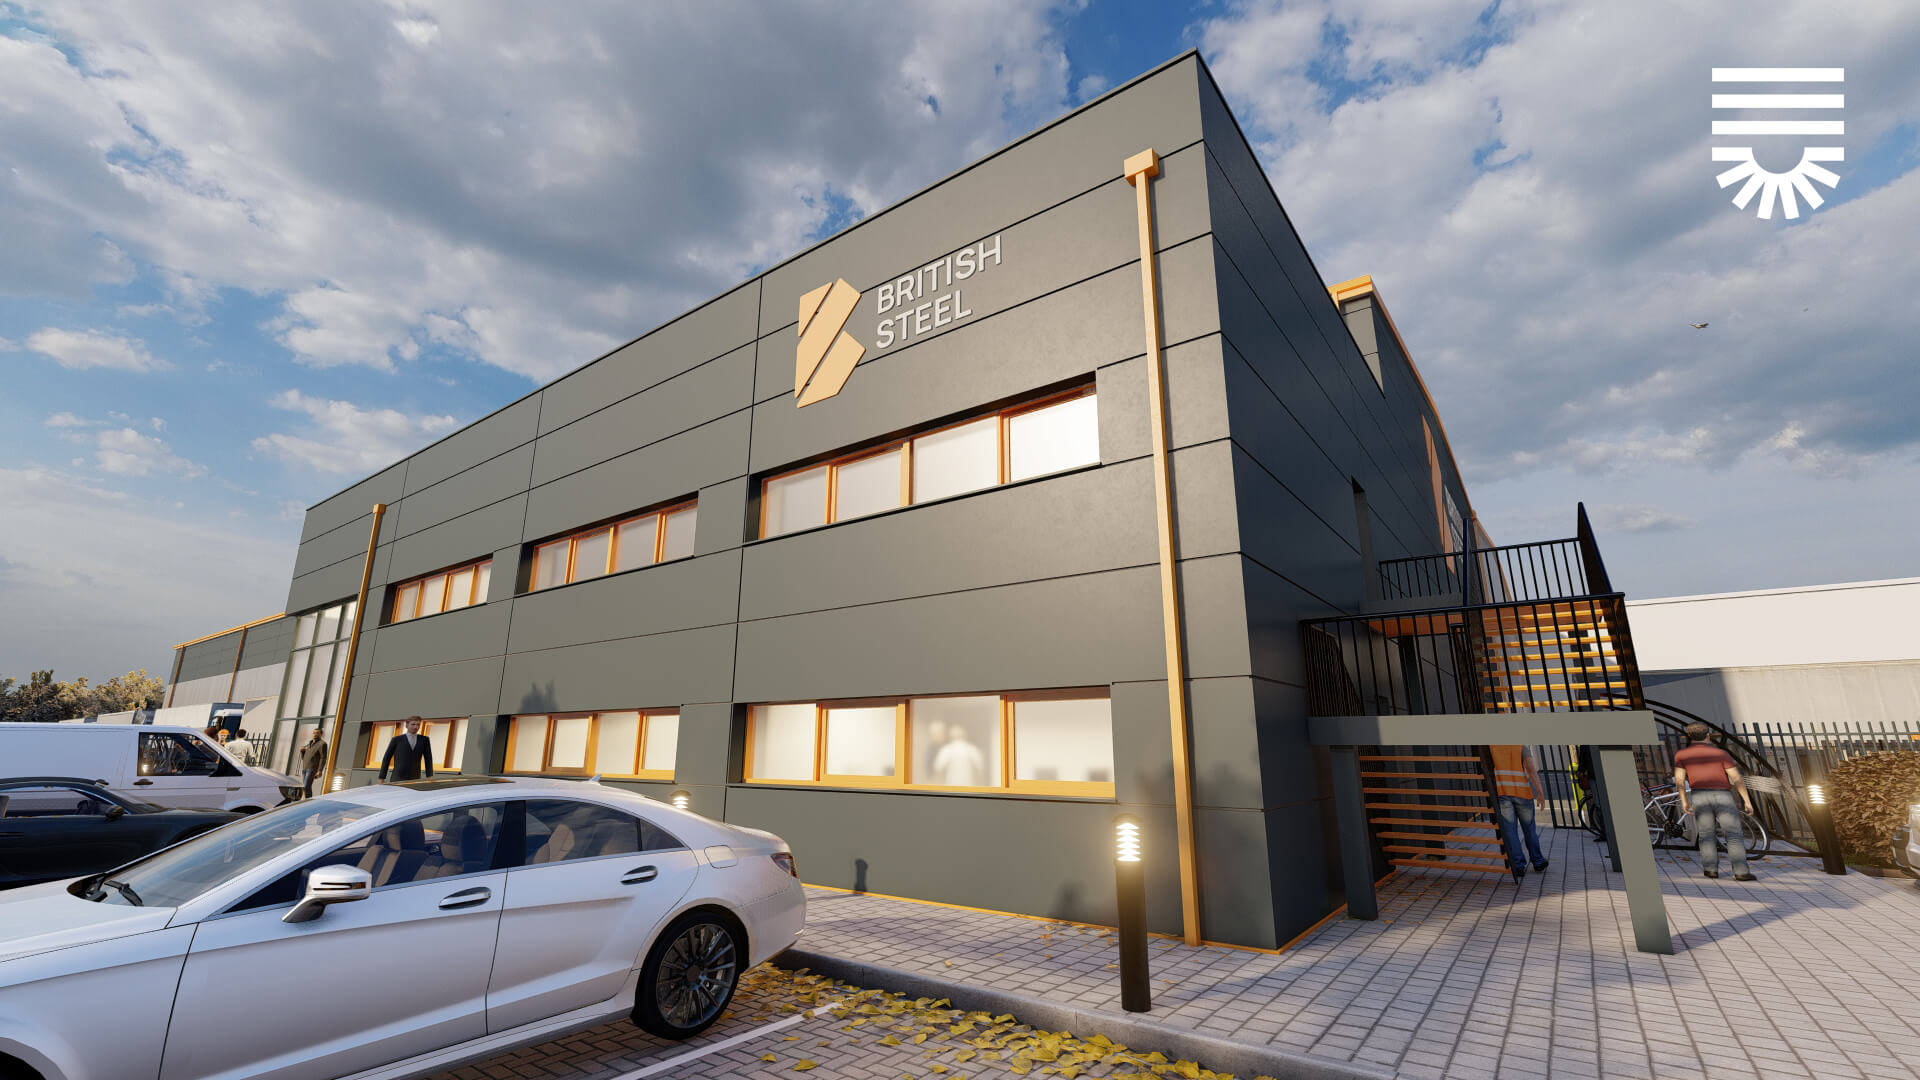 Building Design Northern Appointed for £26m Steel Facility